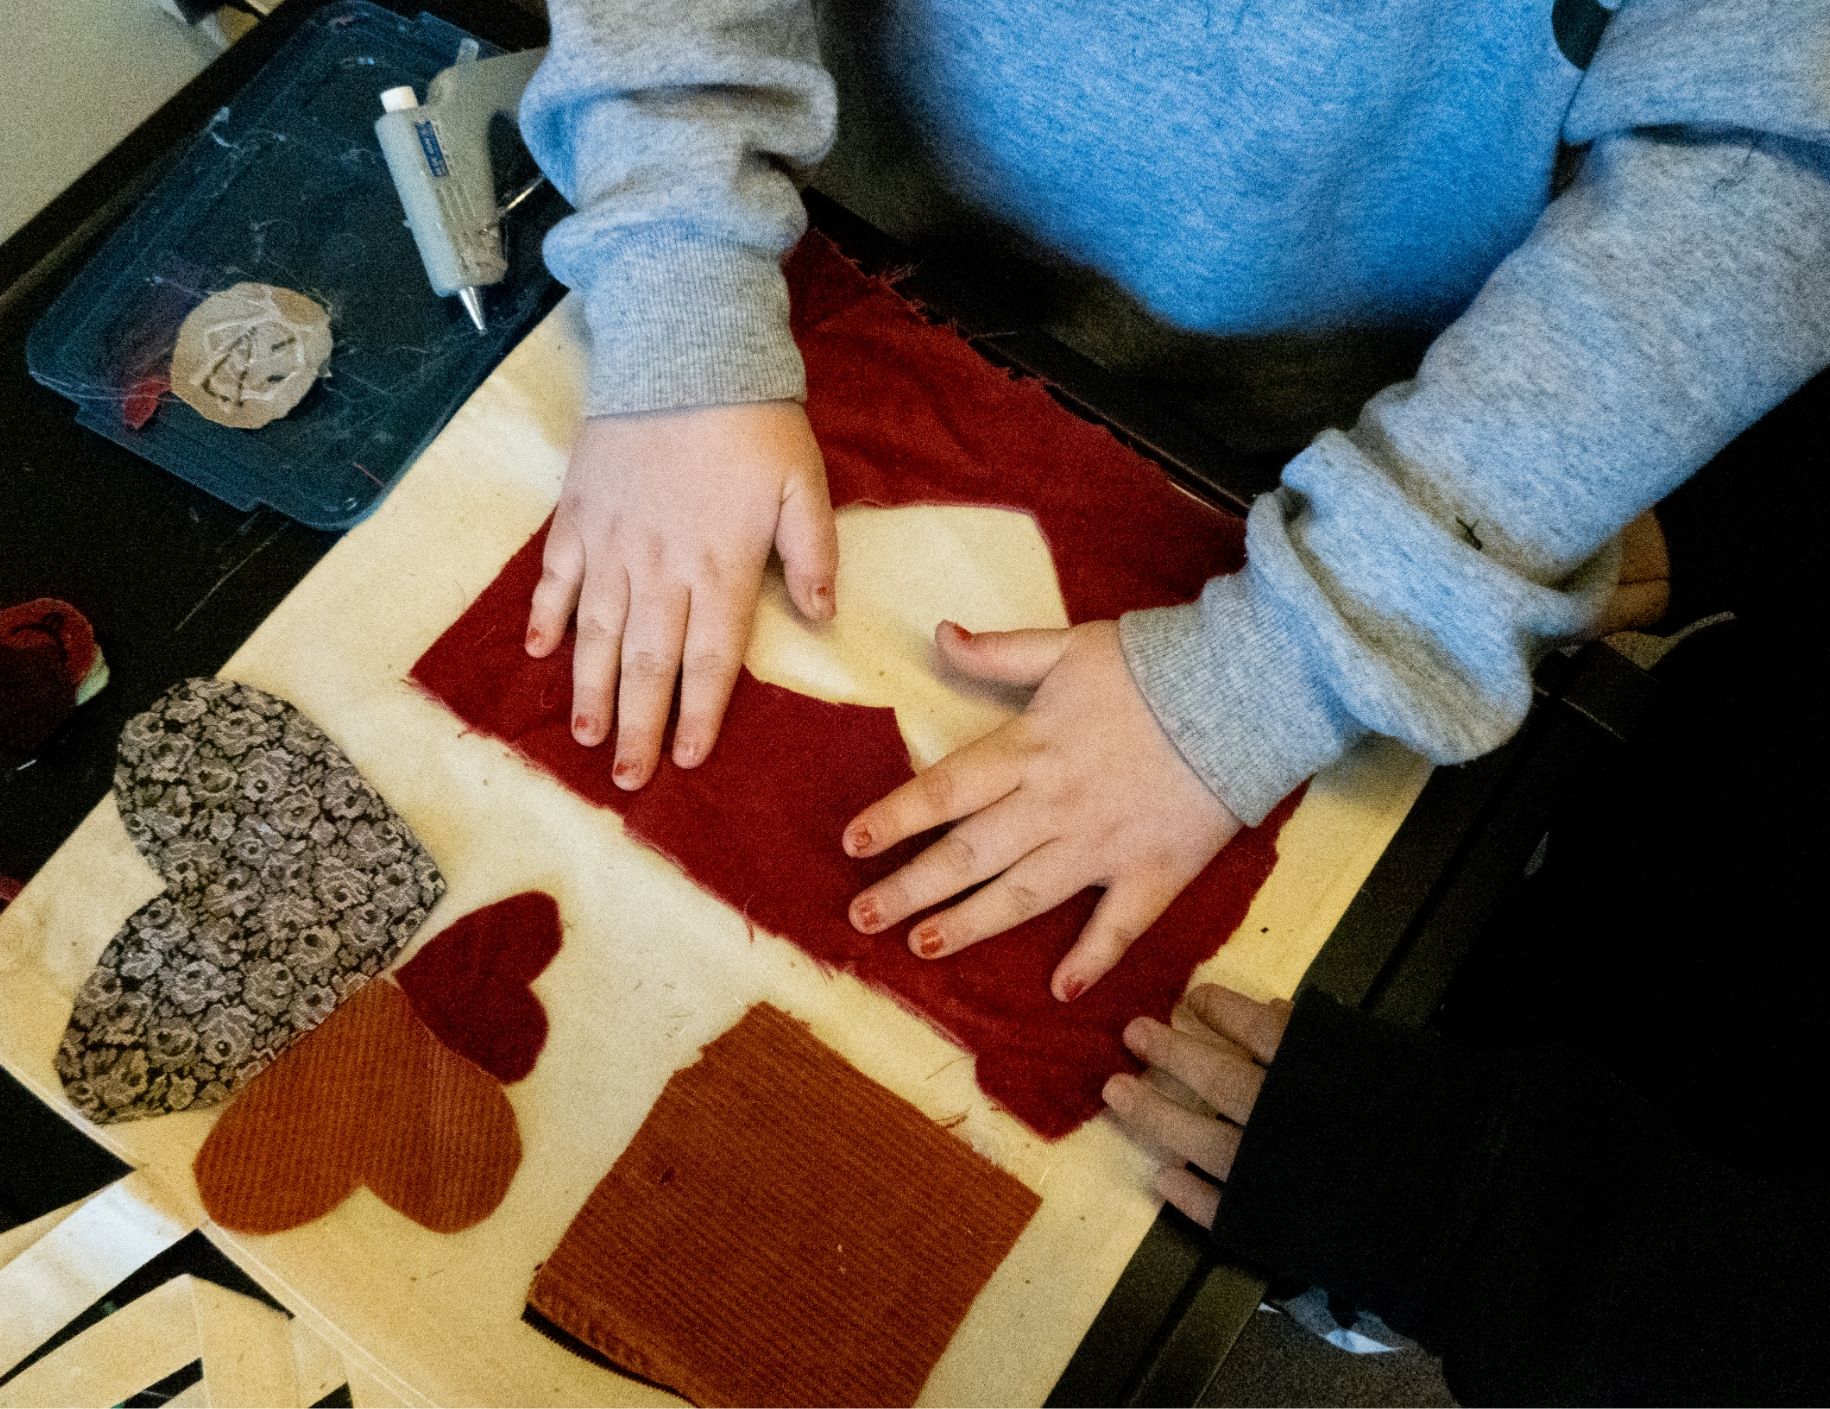 A young person glues down a fabric heart onto a tote bag